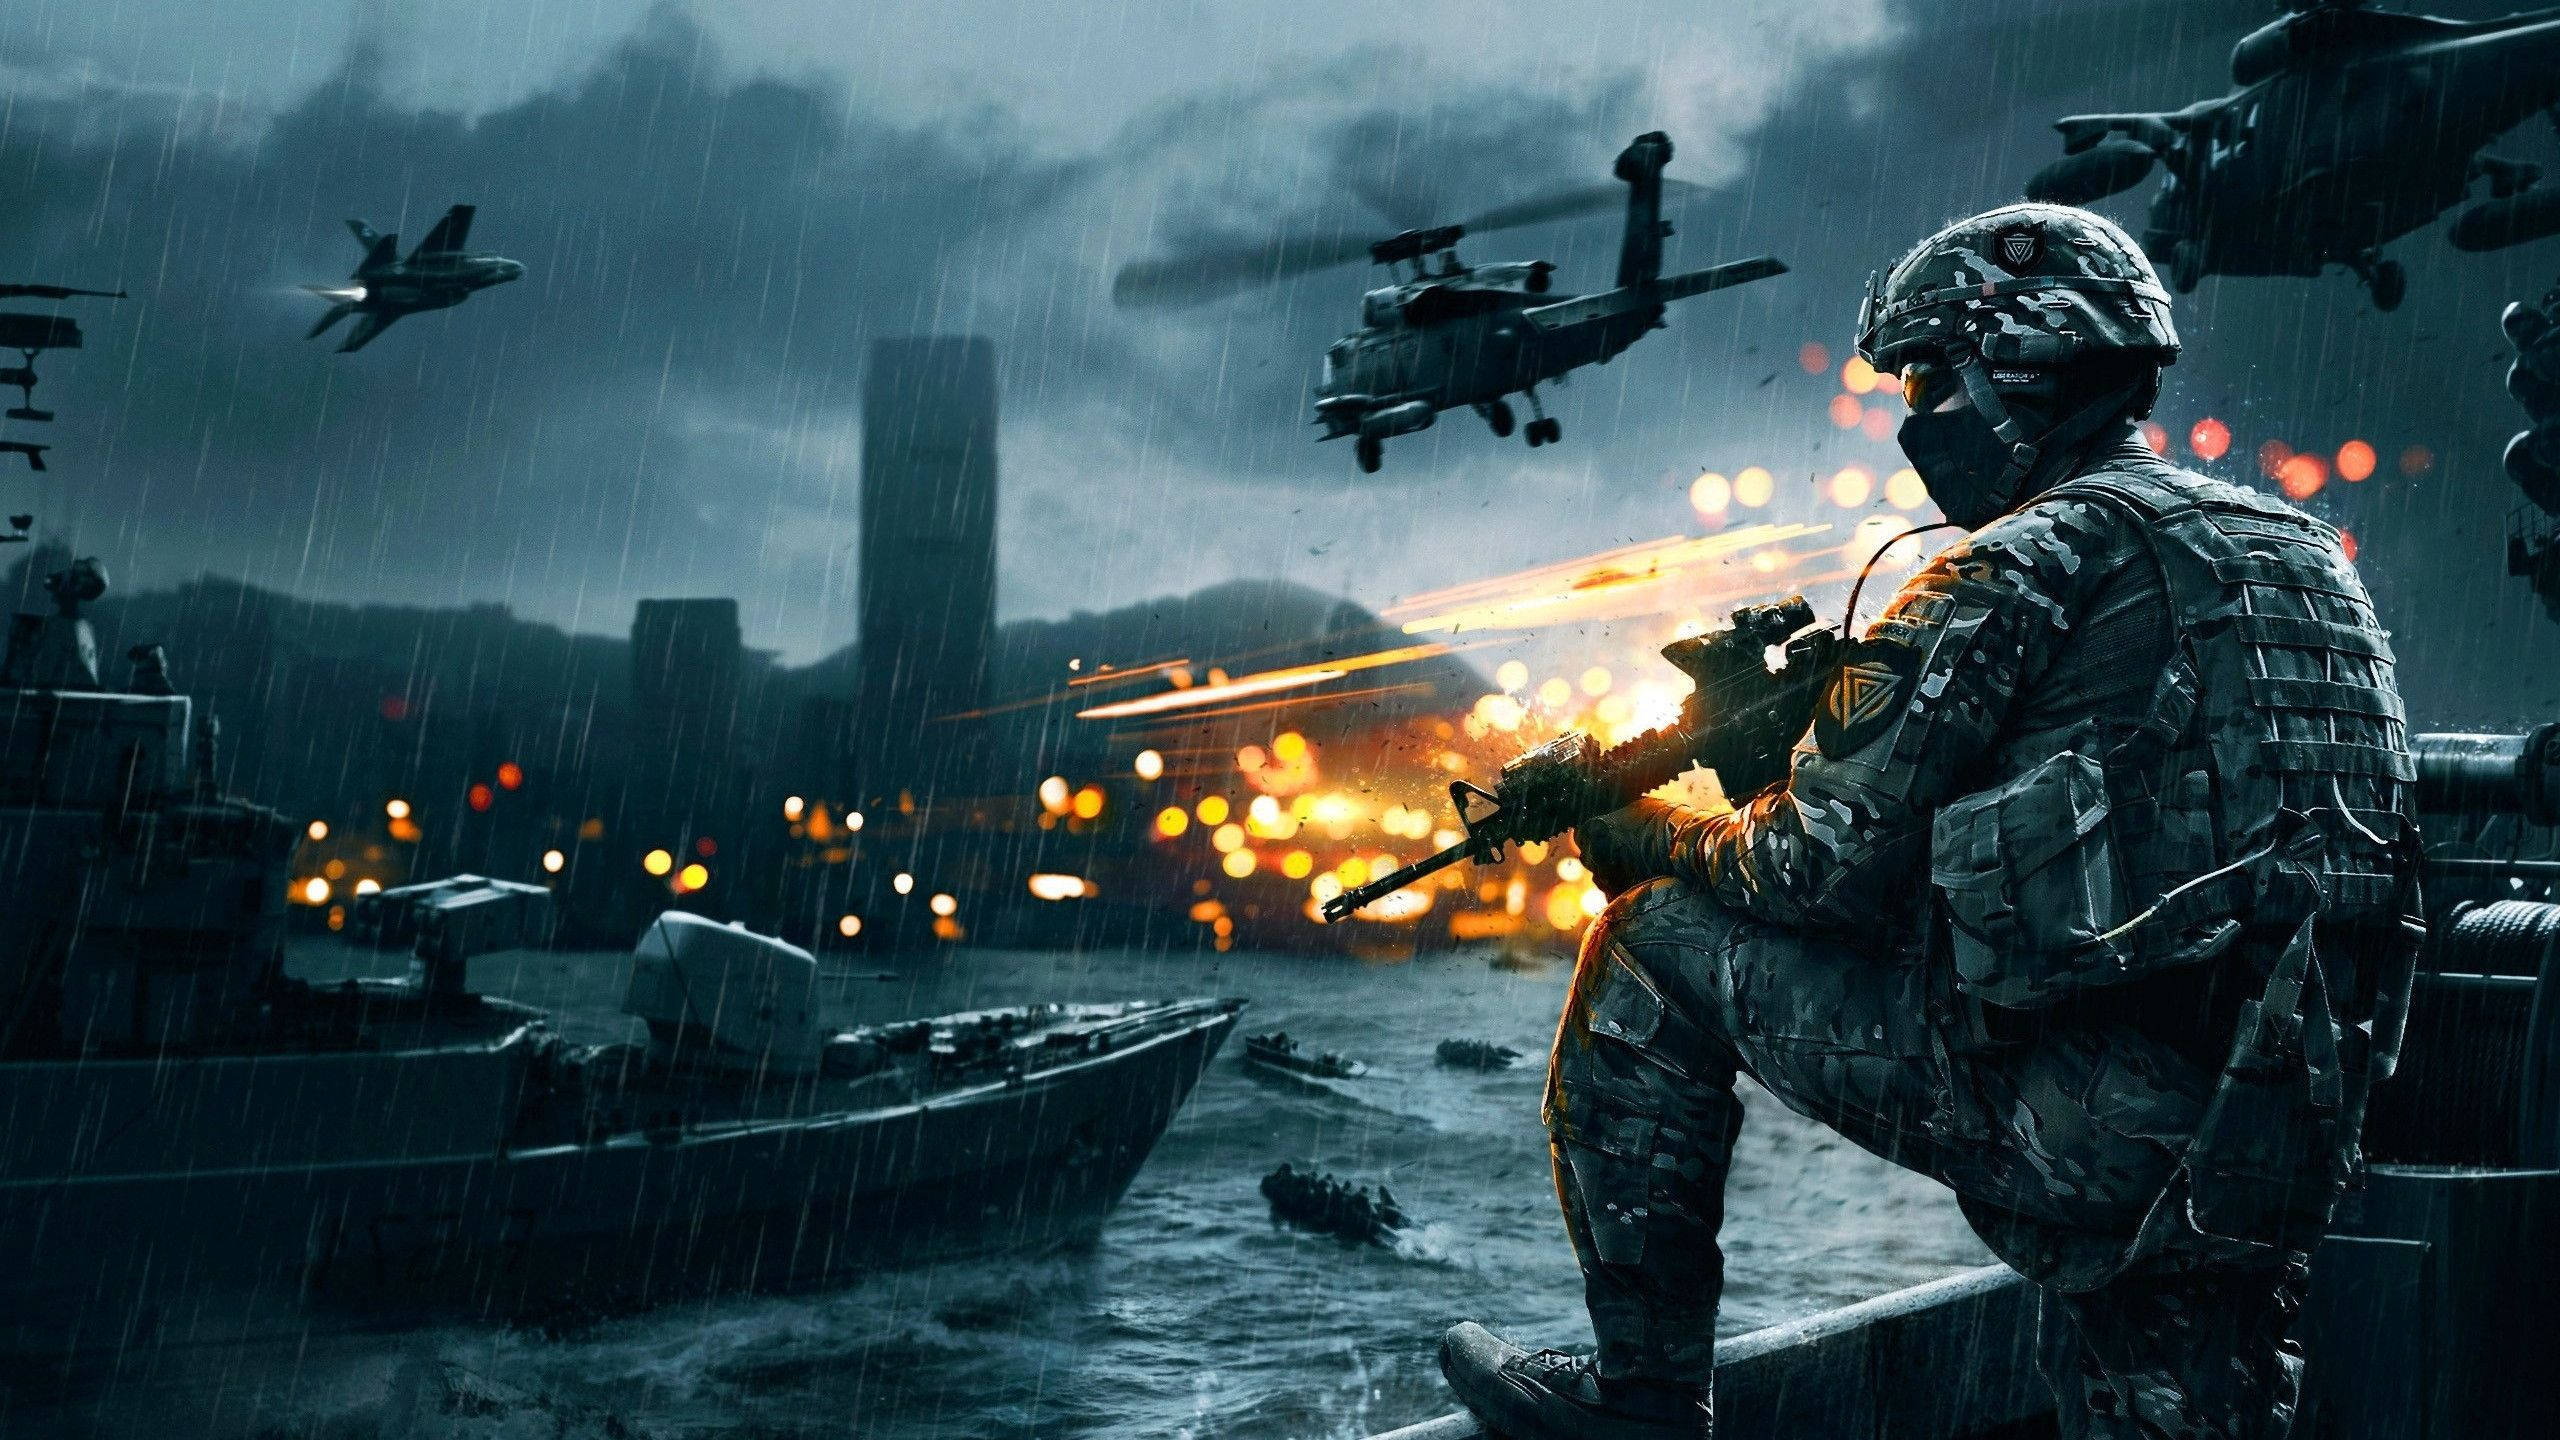 2560x1440 Gaming Battlefield 4 Video Game Background